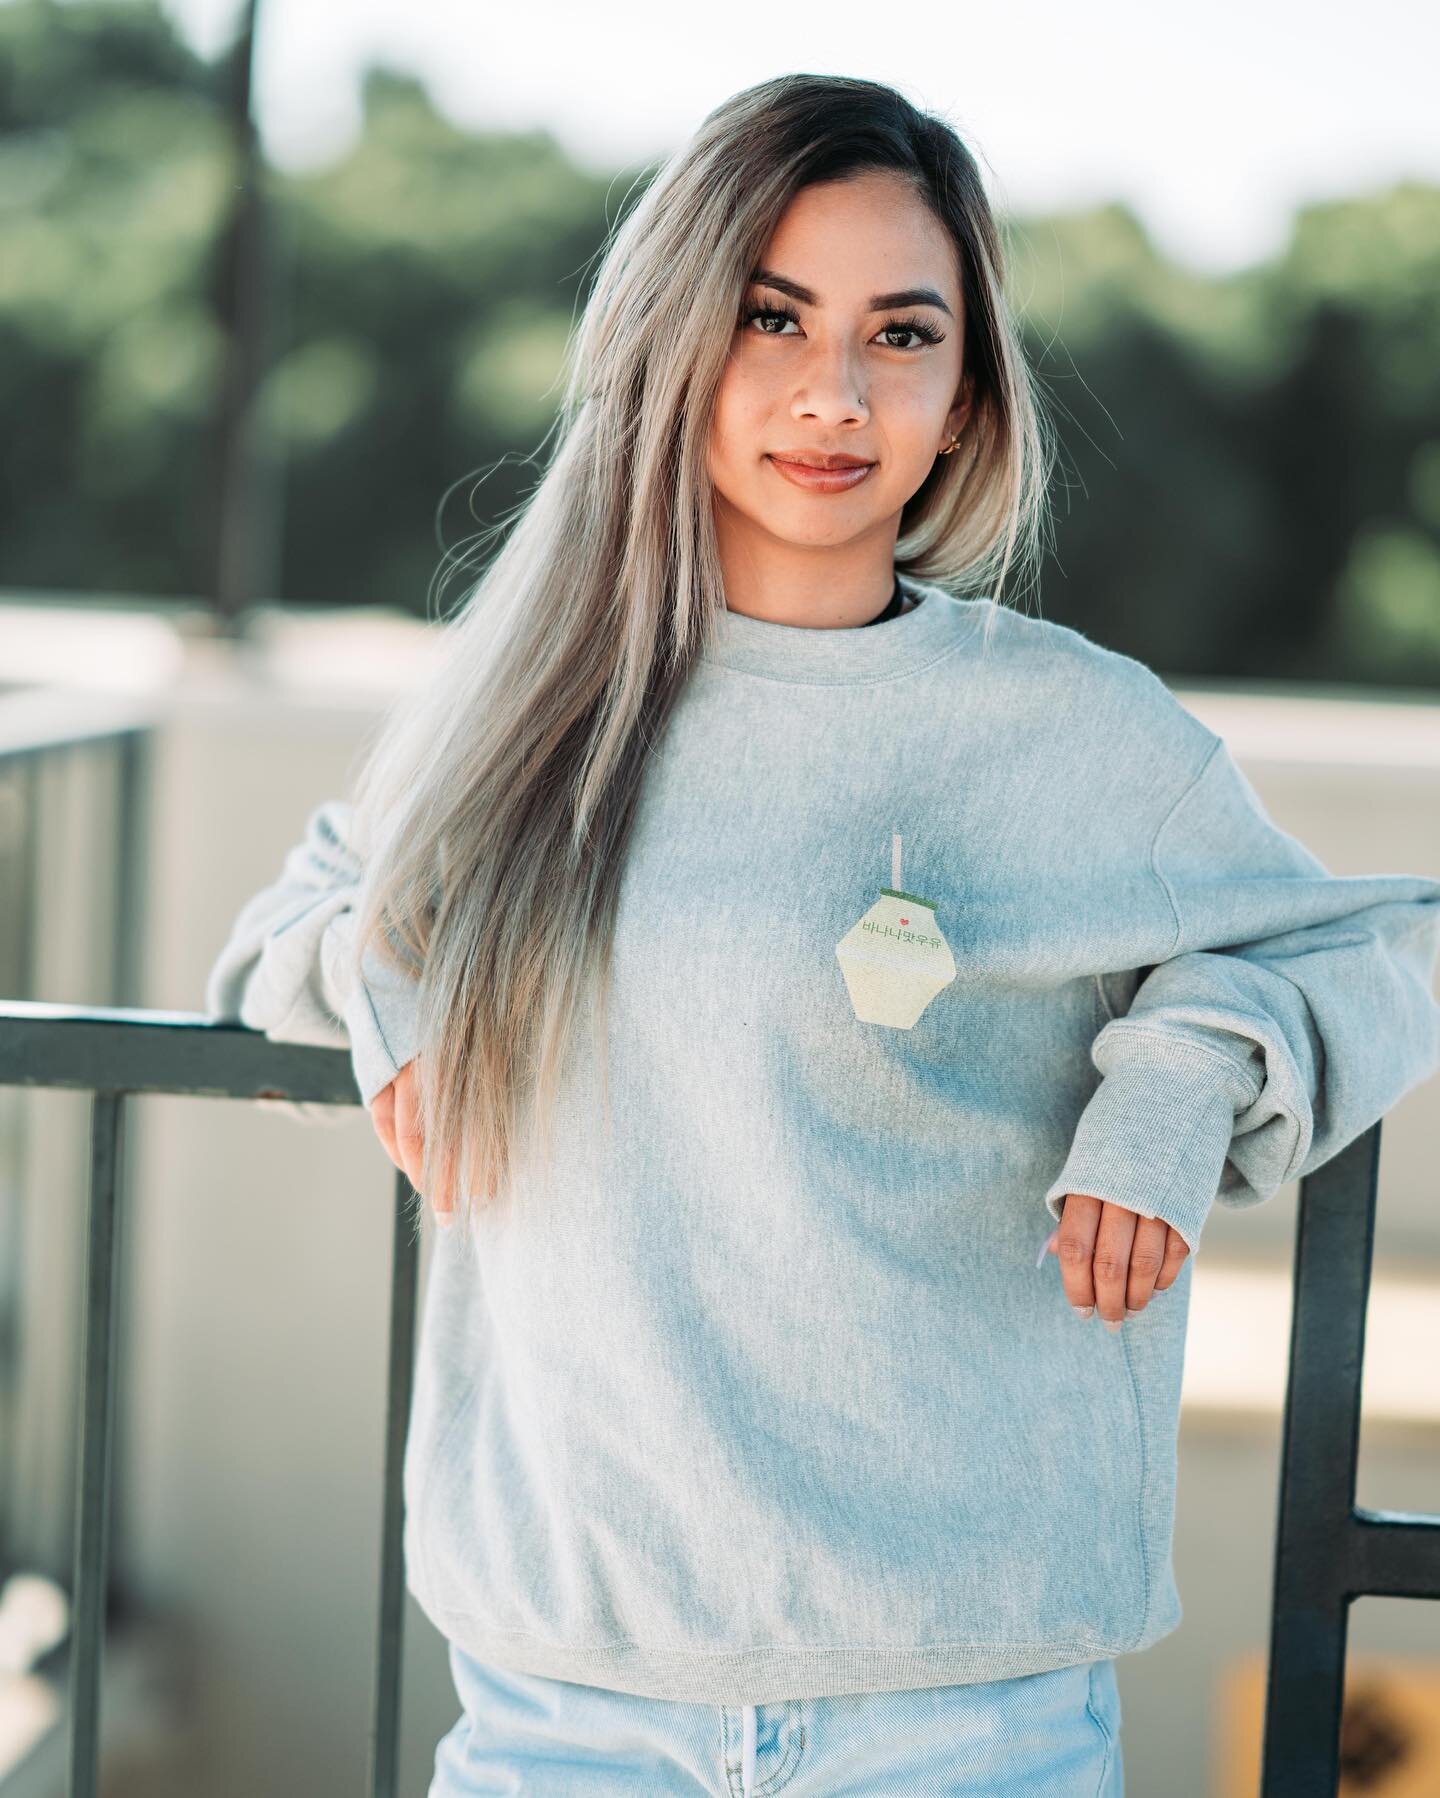 Hoodies and sweaters are using champion products so they are super soft and comfortable! @ricebowl.store
-
-
-
-
-
-
-
-
-
-
-
-
-
-
#bananamilk #streetwear #womensstyle #championsweatshirt #hypebae #startup #asiancreativenetwork #koreanfashion #kore